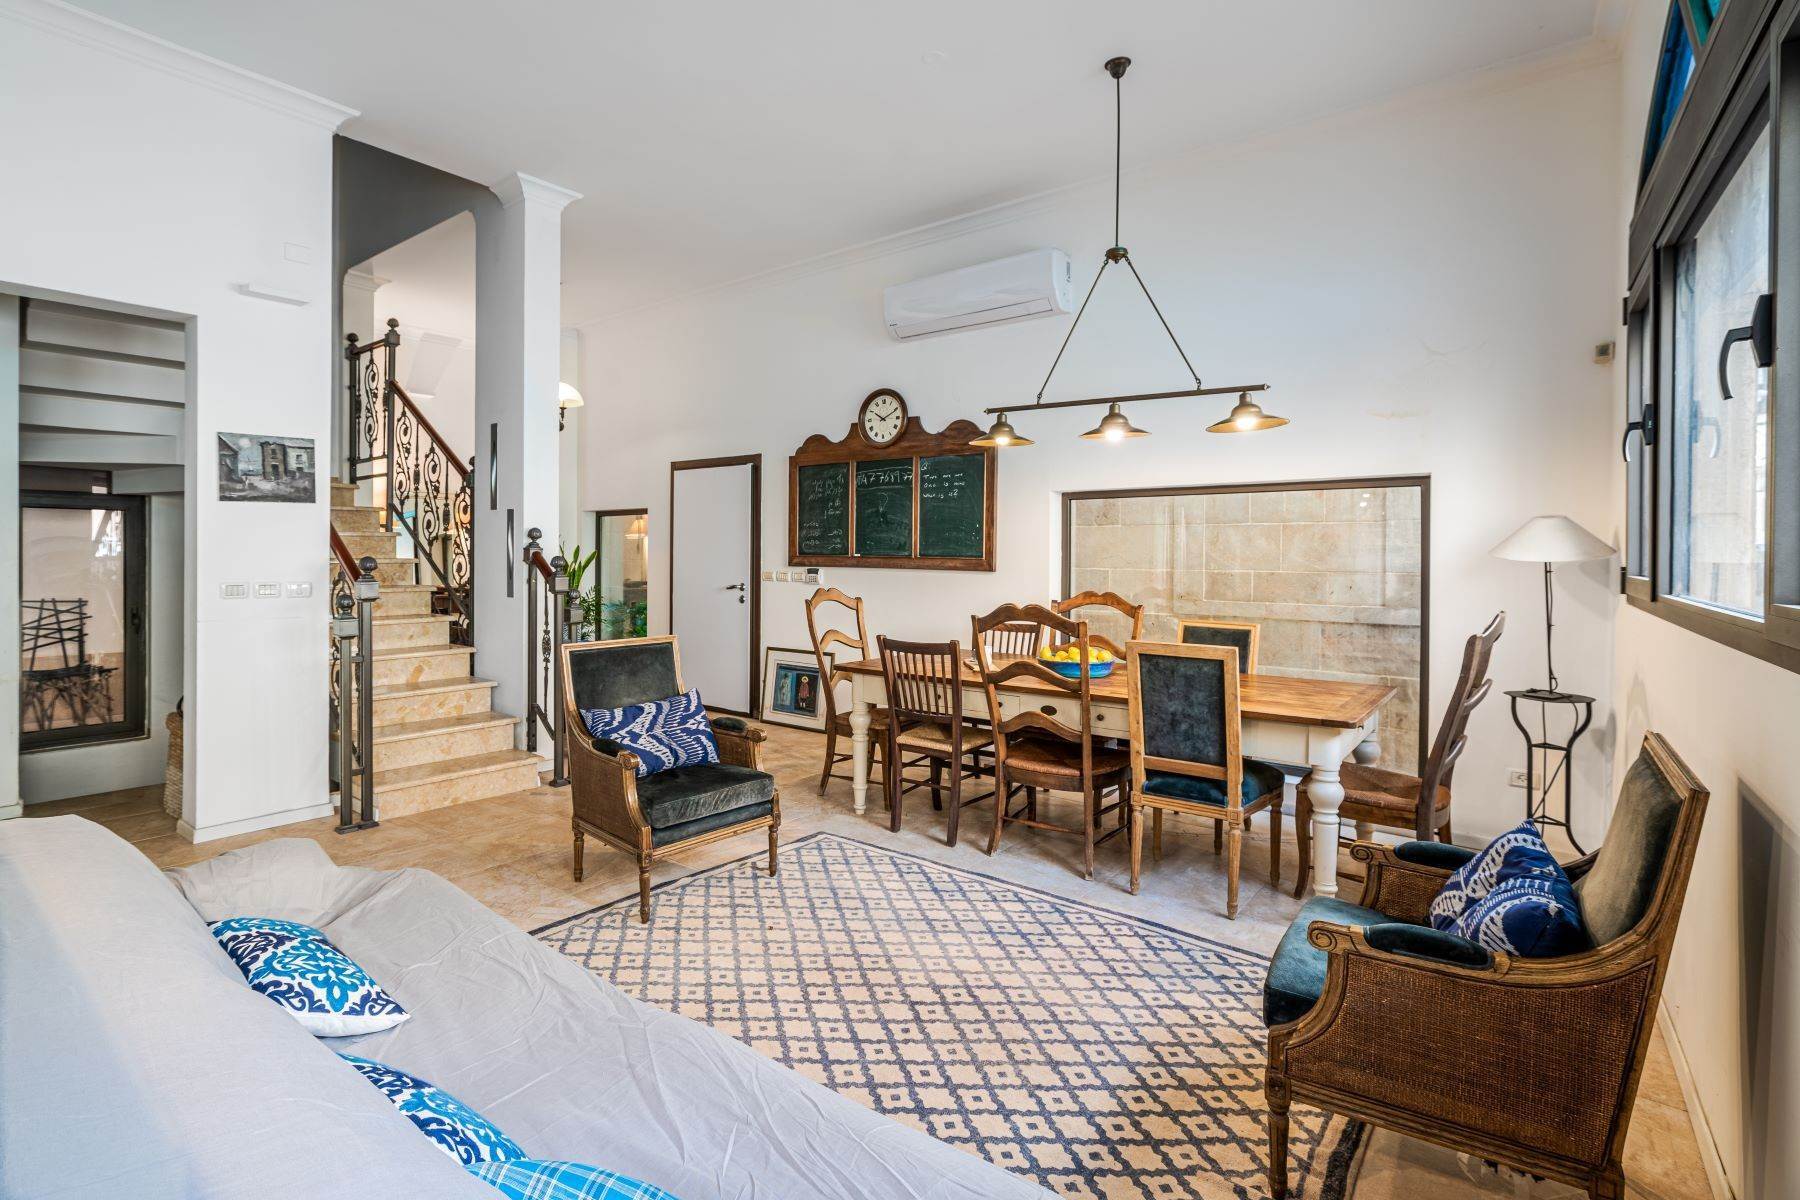 Single Family Homes for Sale at Authentic Mediterranean Style 4-Story Home in Jaffa Tel Aviv, Israel Israel